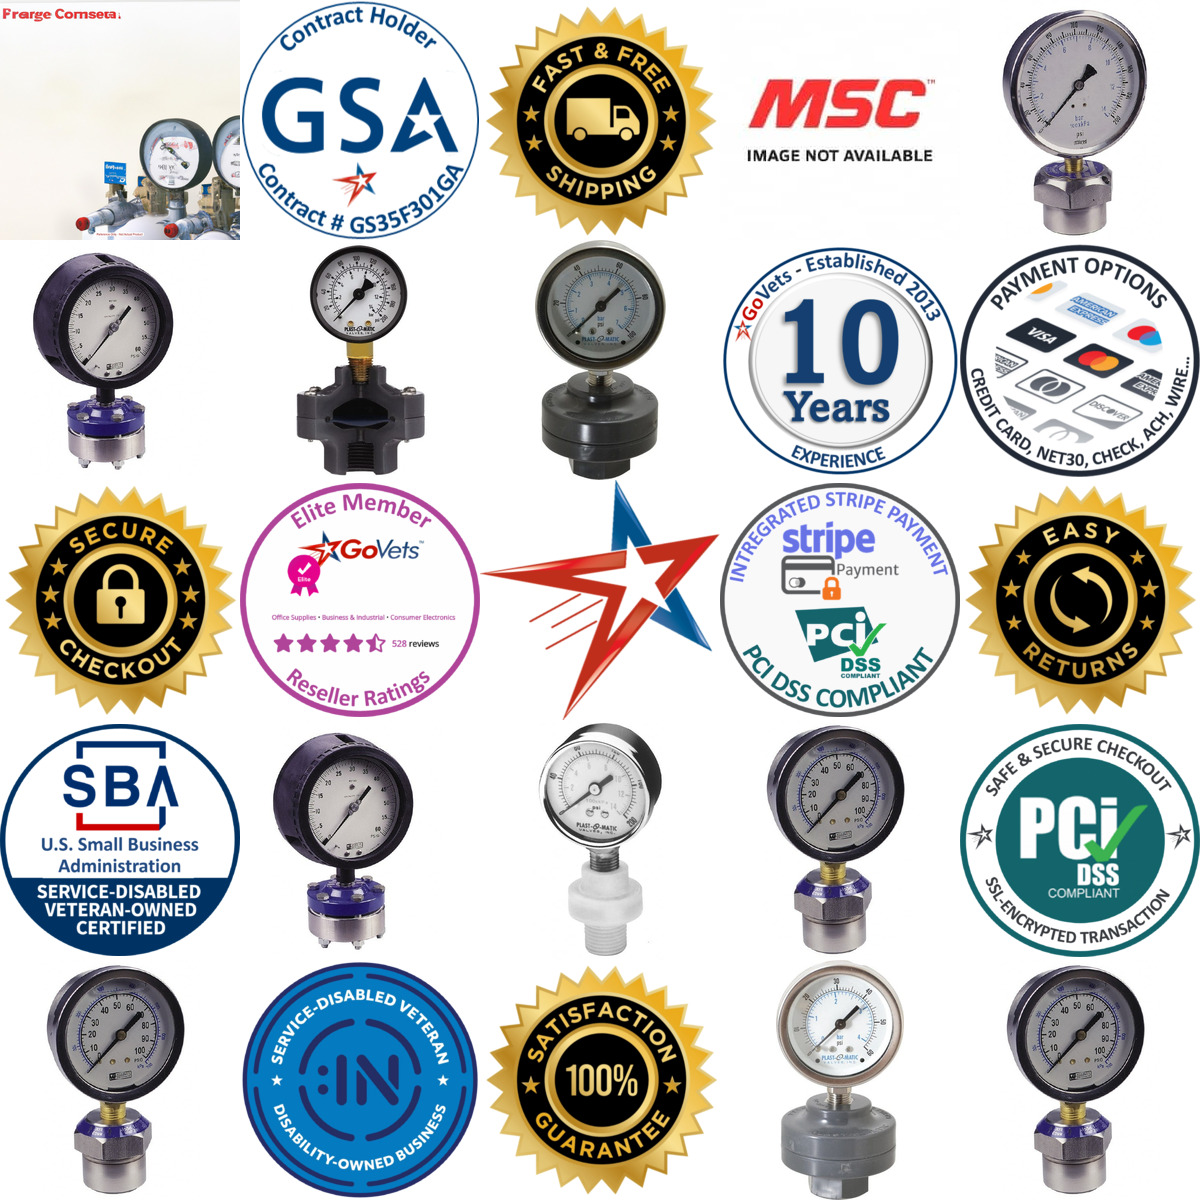 A selection of Pressure Gauge Guards and Isolators products on GoVets